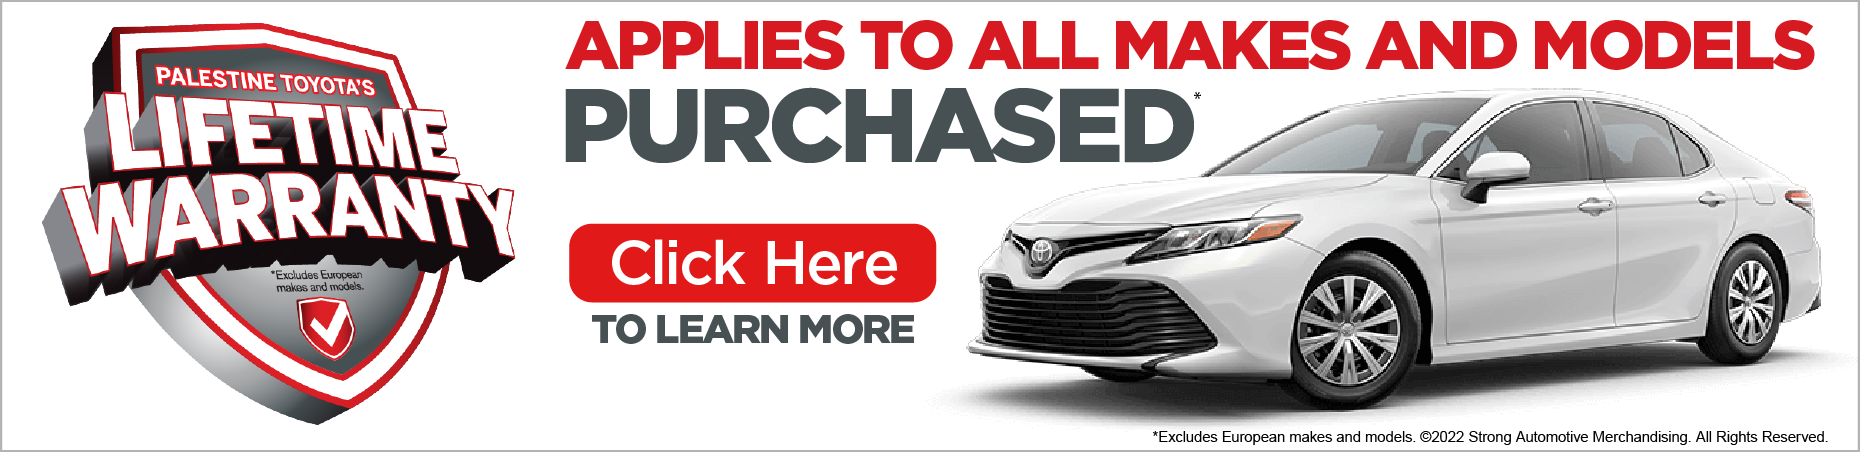 Palestine Toyota's Lifetime Warranty - Click here to learn more